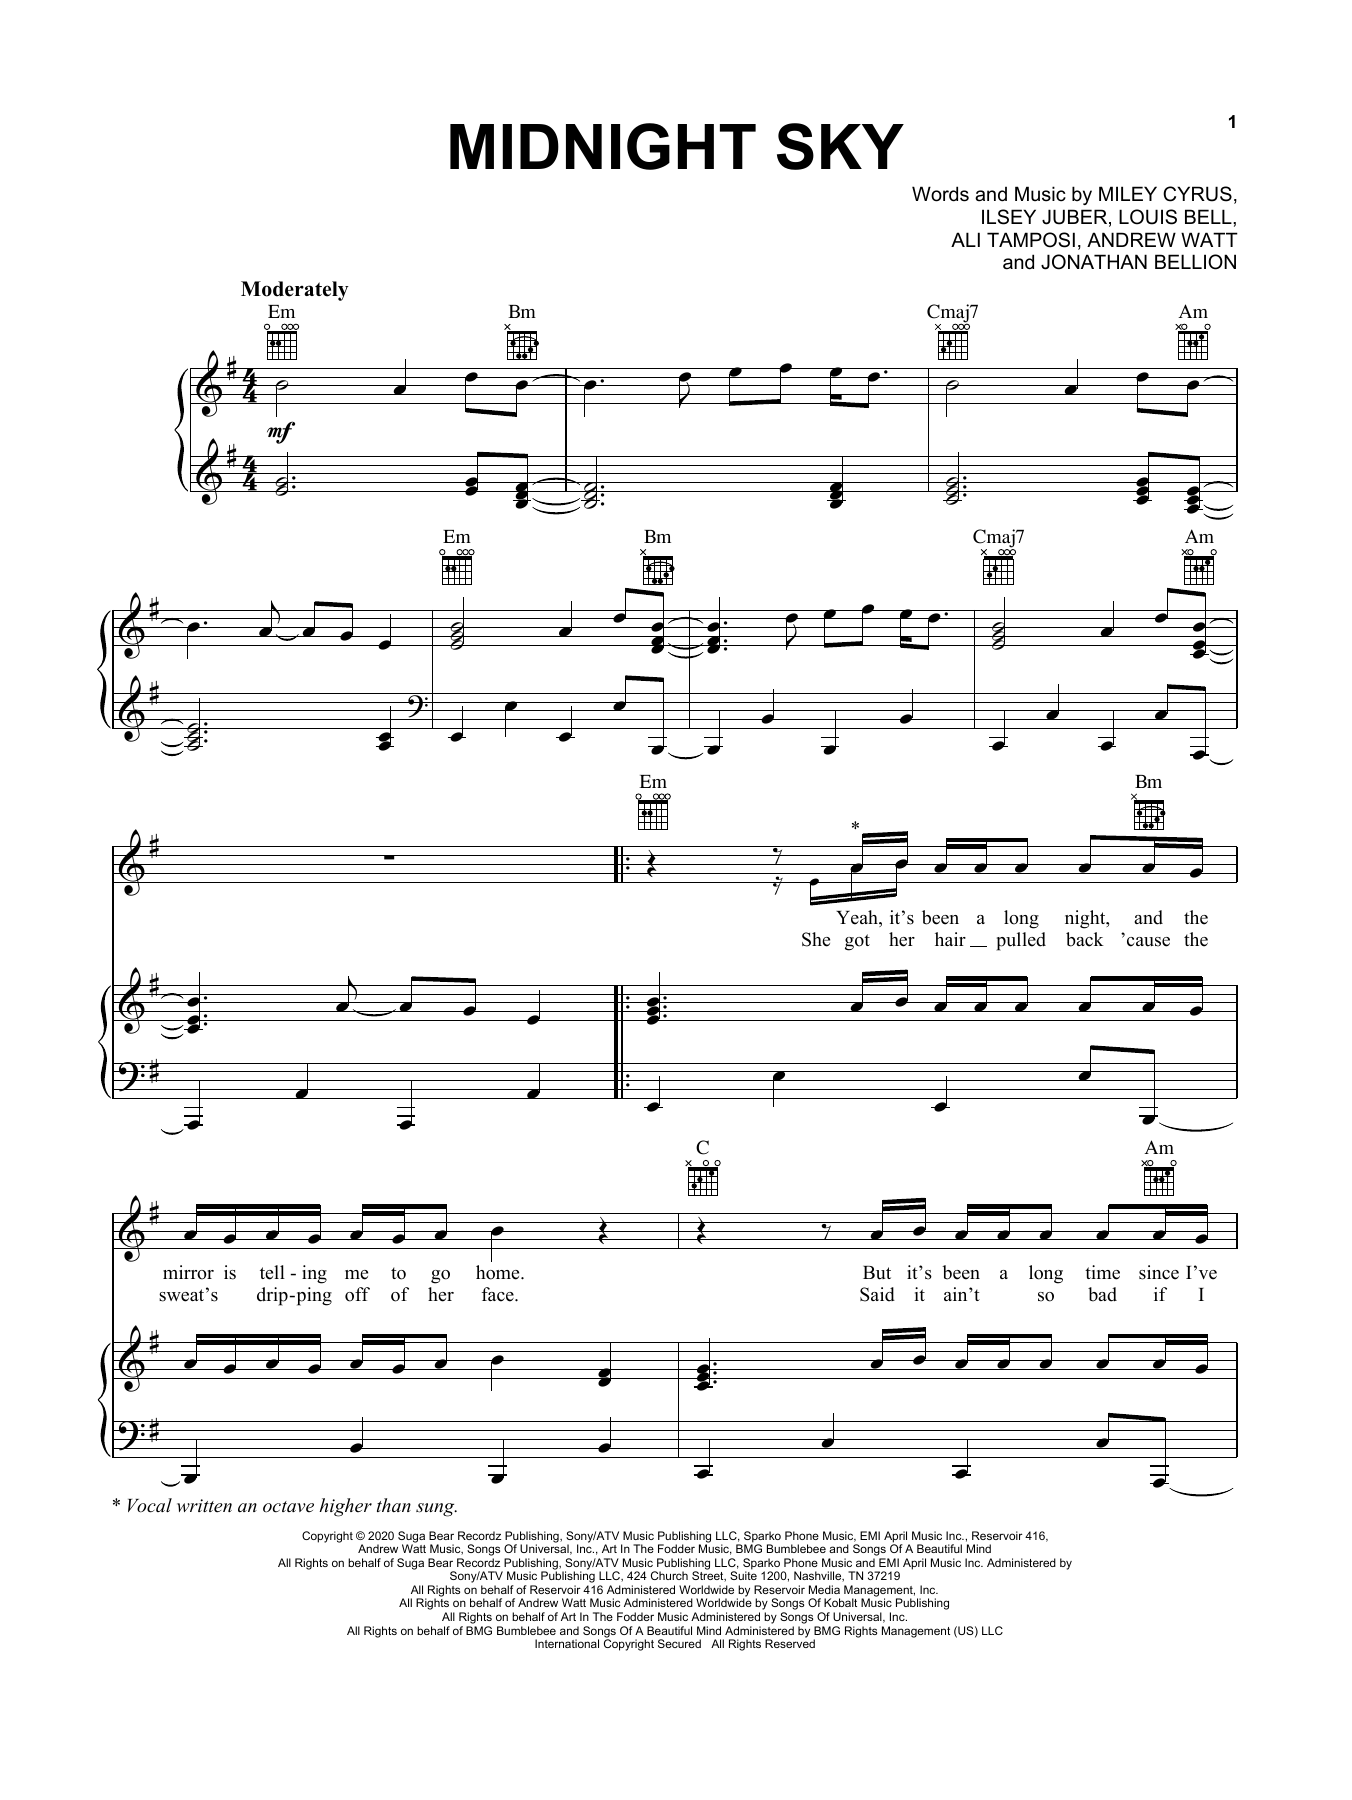 Download Miley Cyrus Midnight Sky Sheet Music